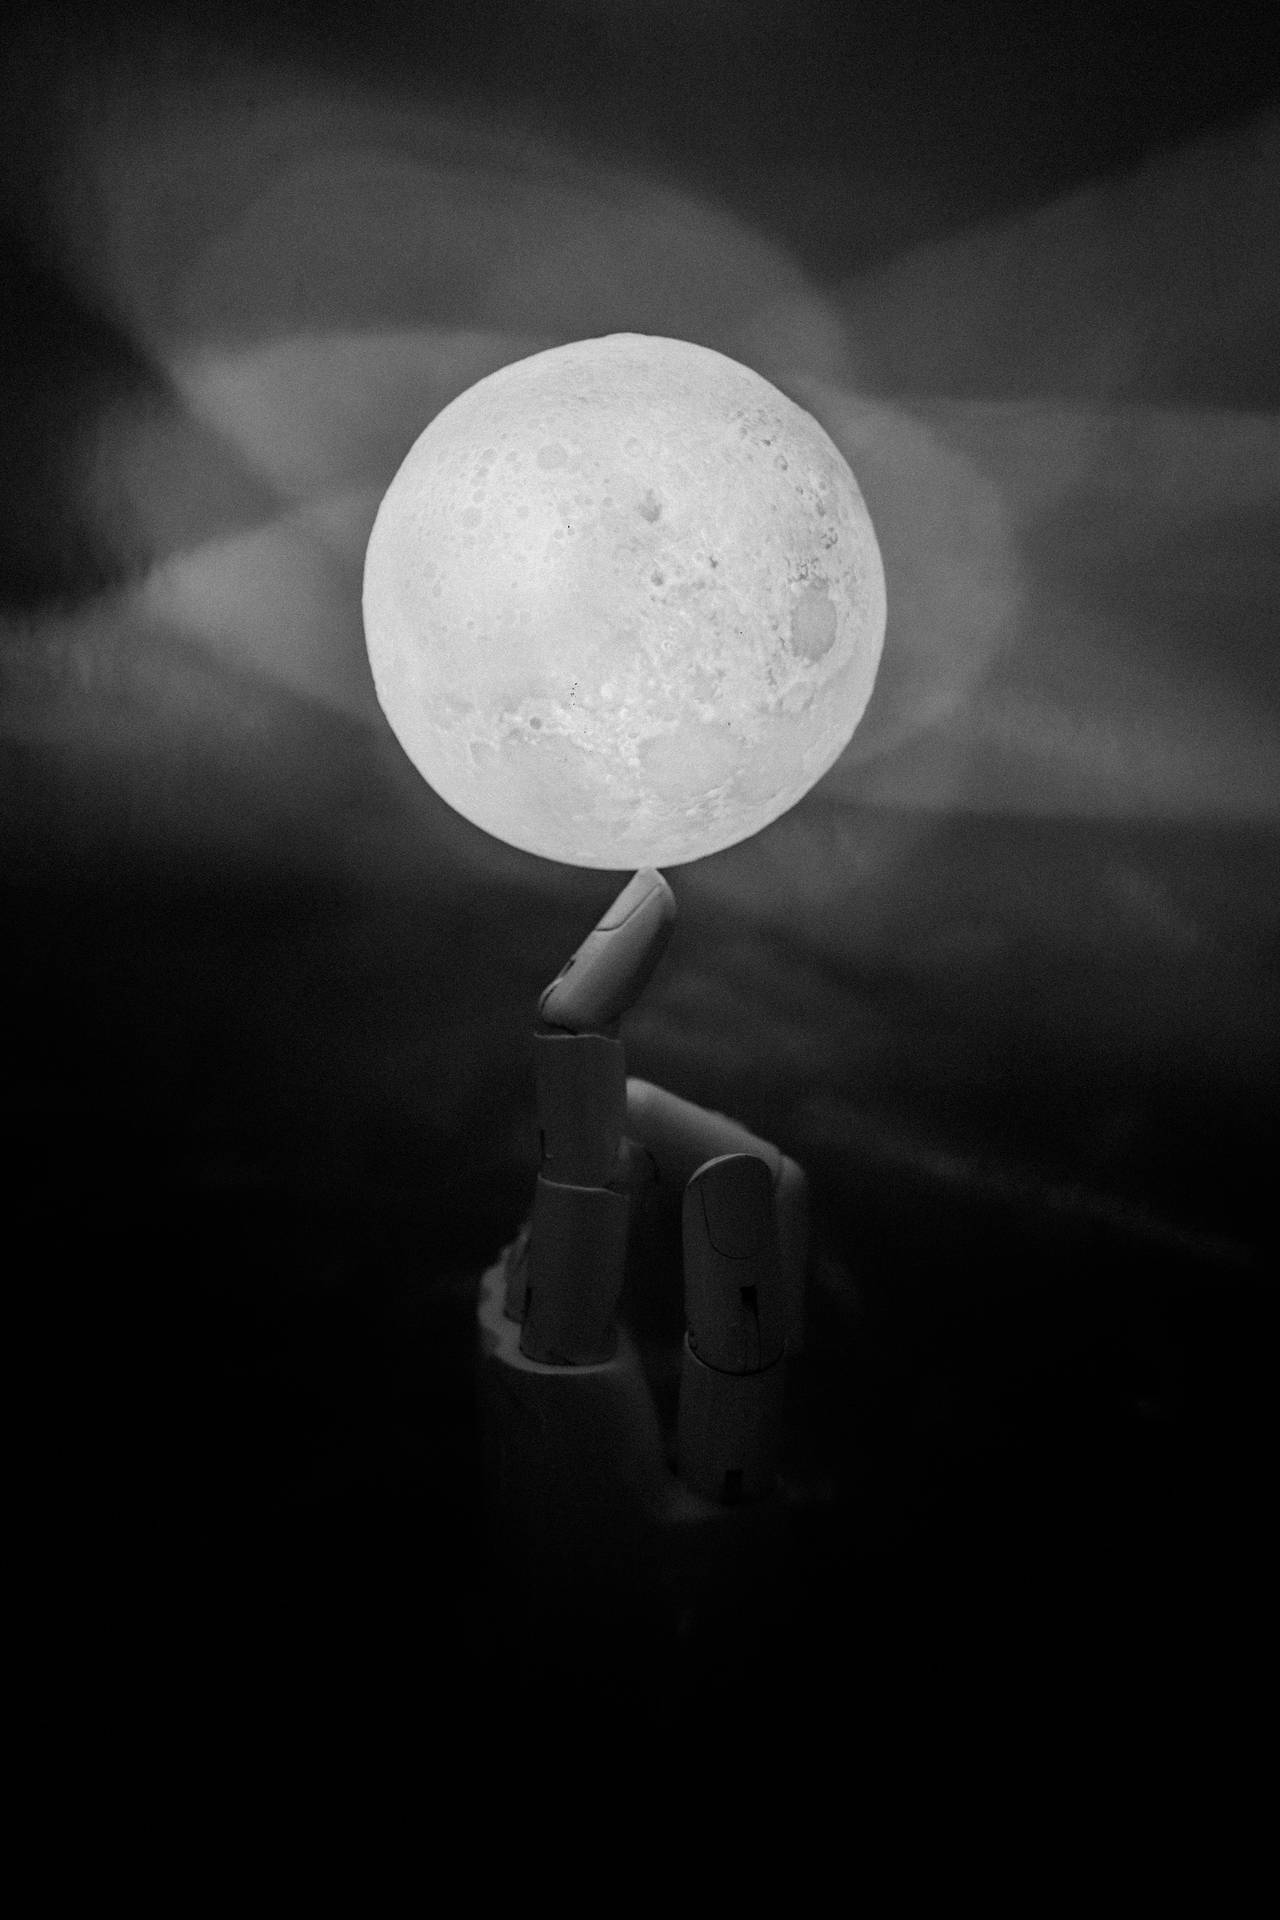 Touching The Full Moon Wallpaper